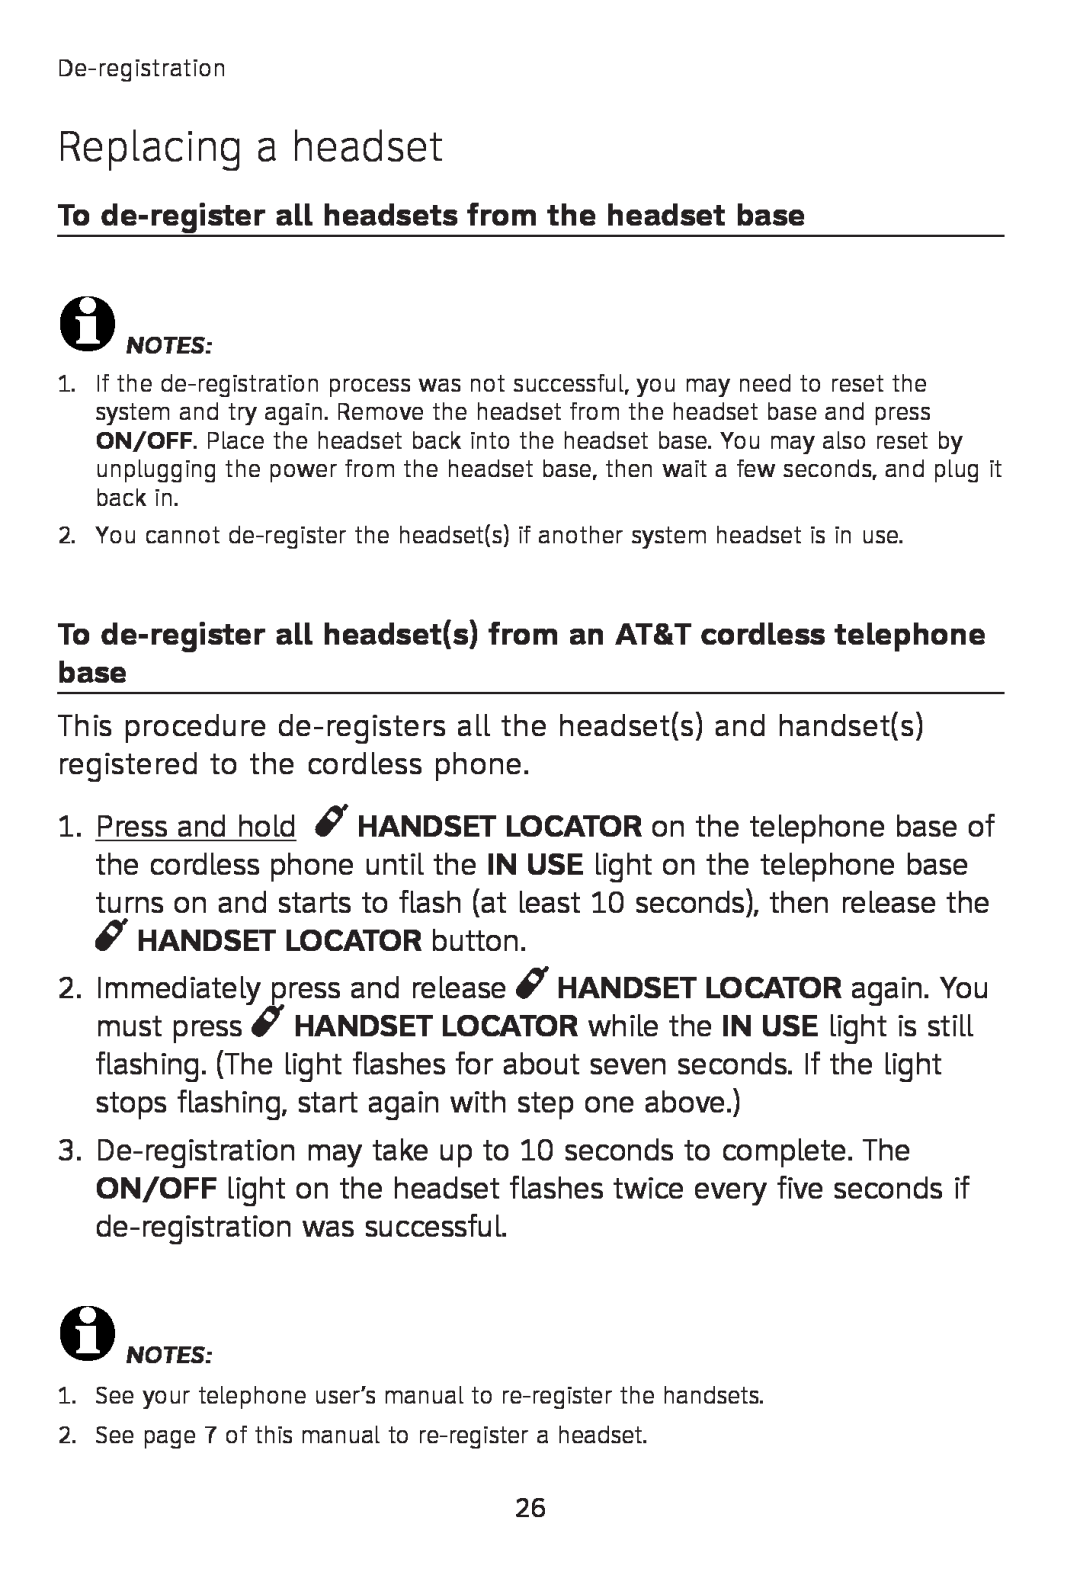 AT&T TL7600 user manual Replacing a headset, To de-registerall headsets from the headset base 